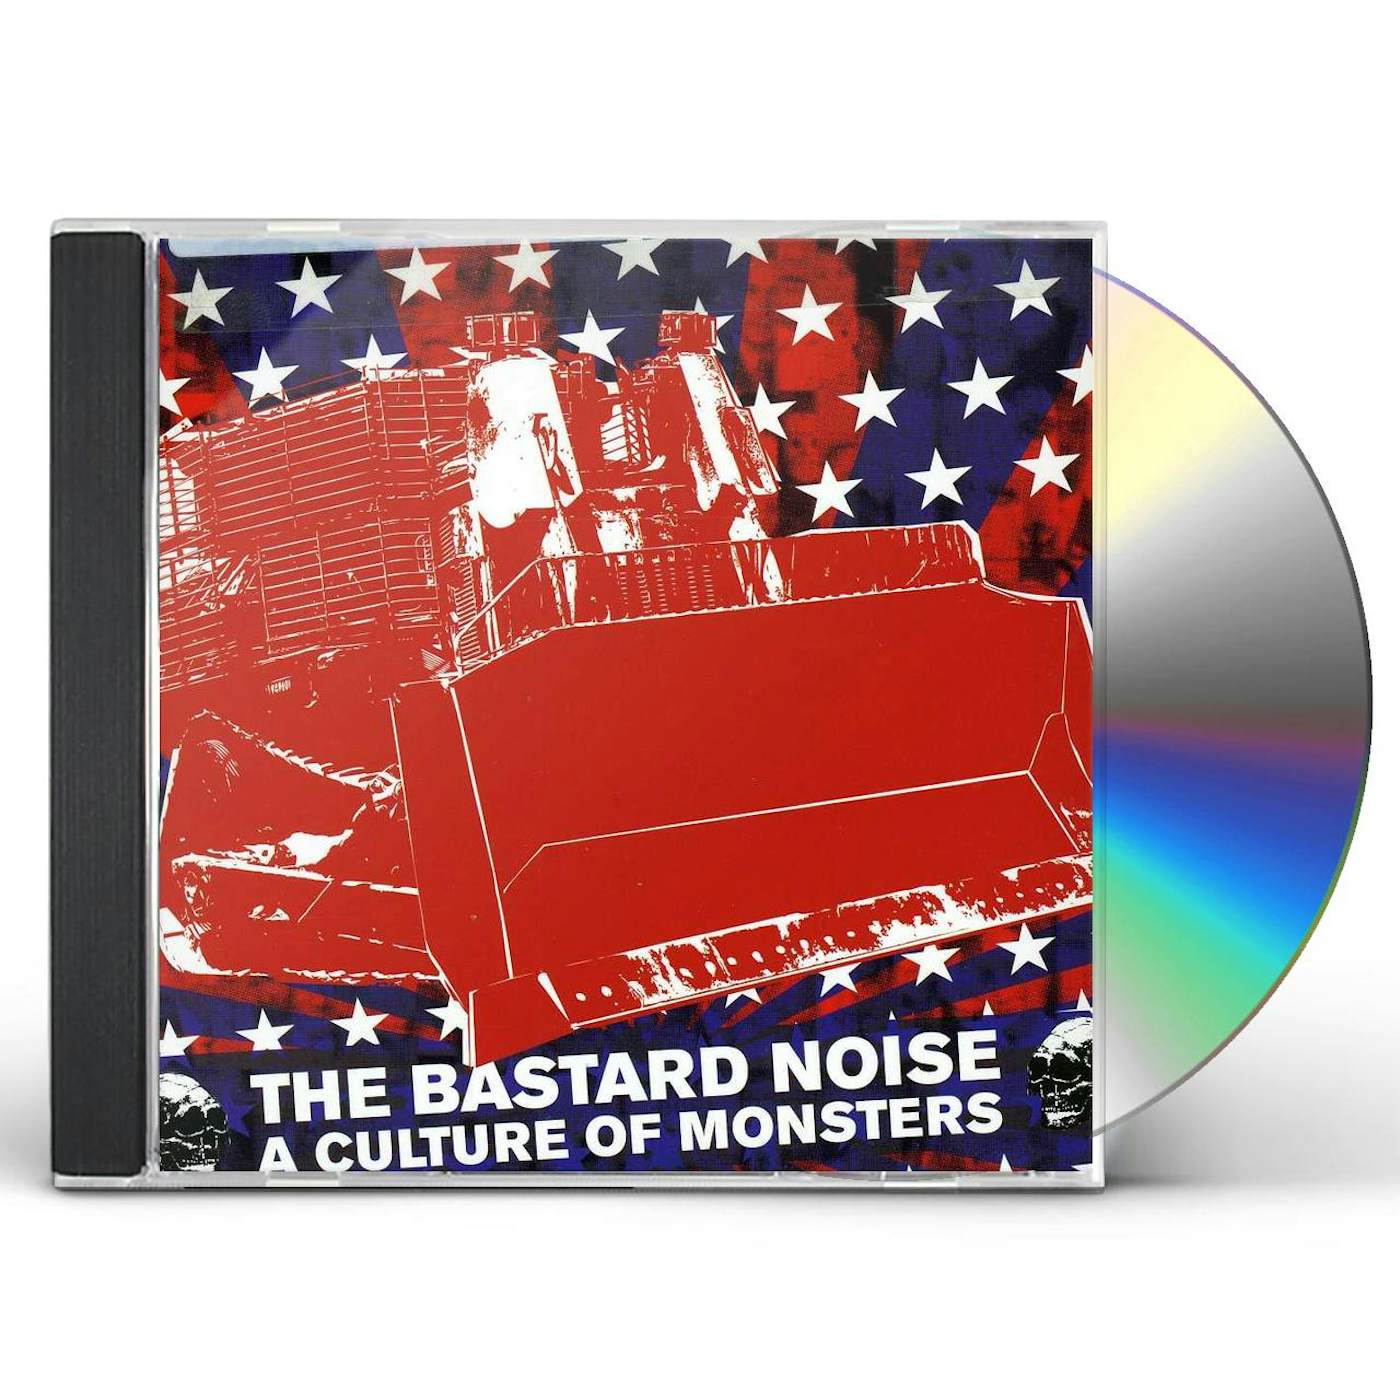 The Bastard Noise CULTURE OF MONSTERS CD